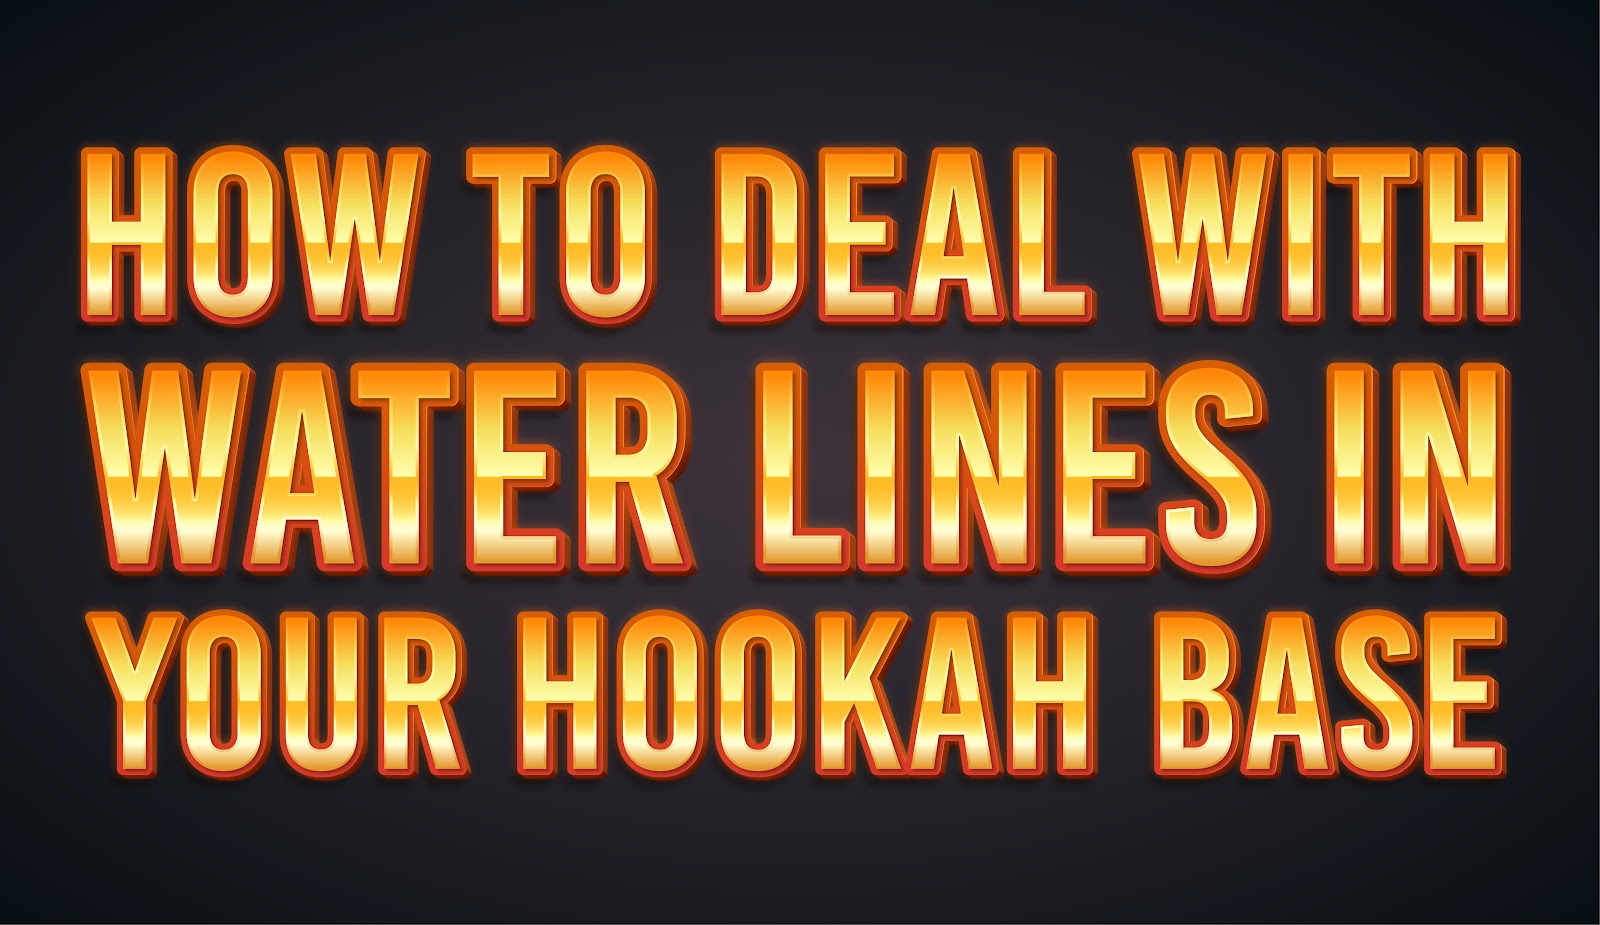 How To Deal With Water Lines in Your Hookah Base